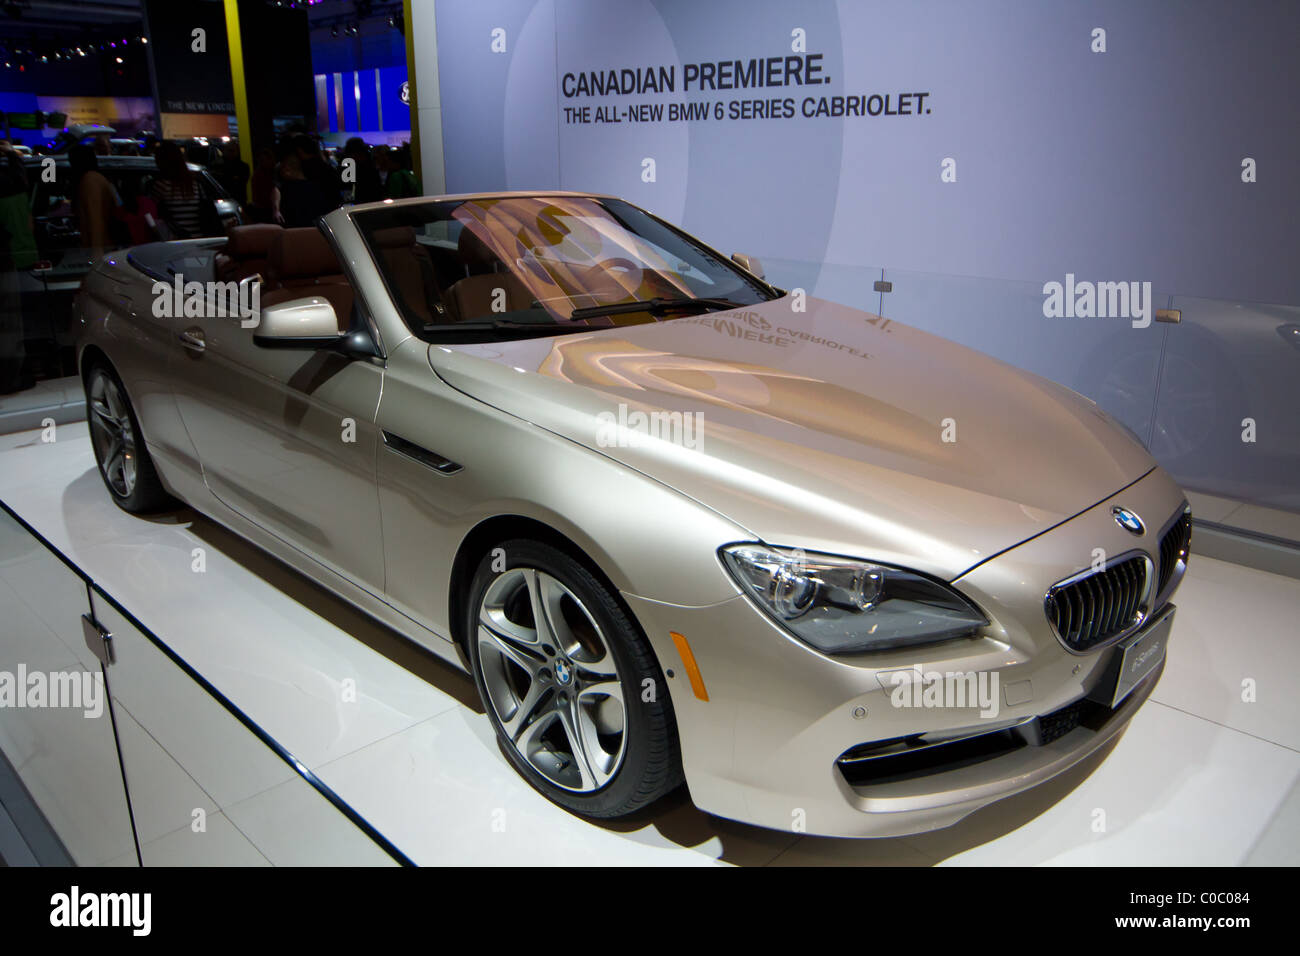 bmw 6 series cabriolet Stock Photo